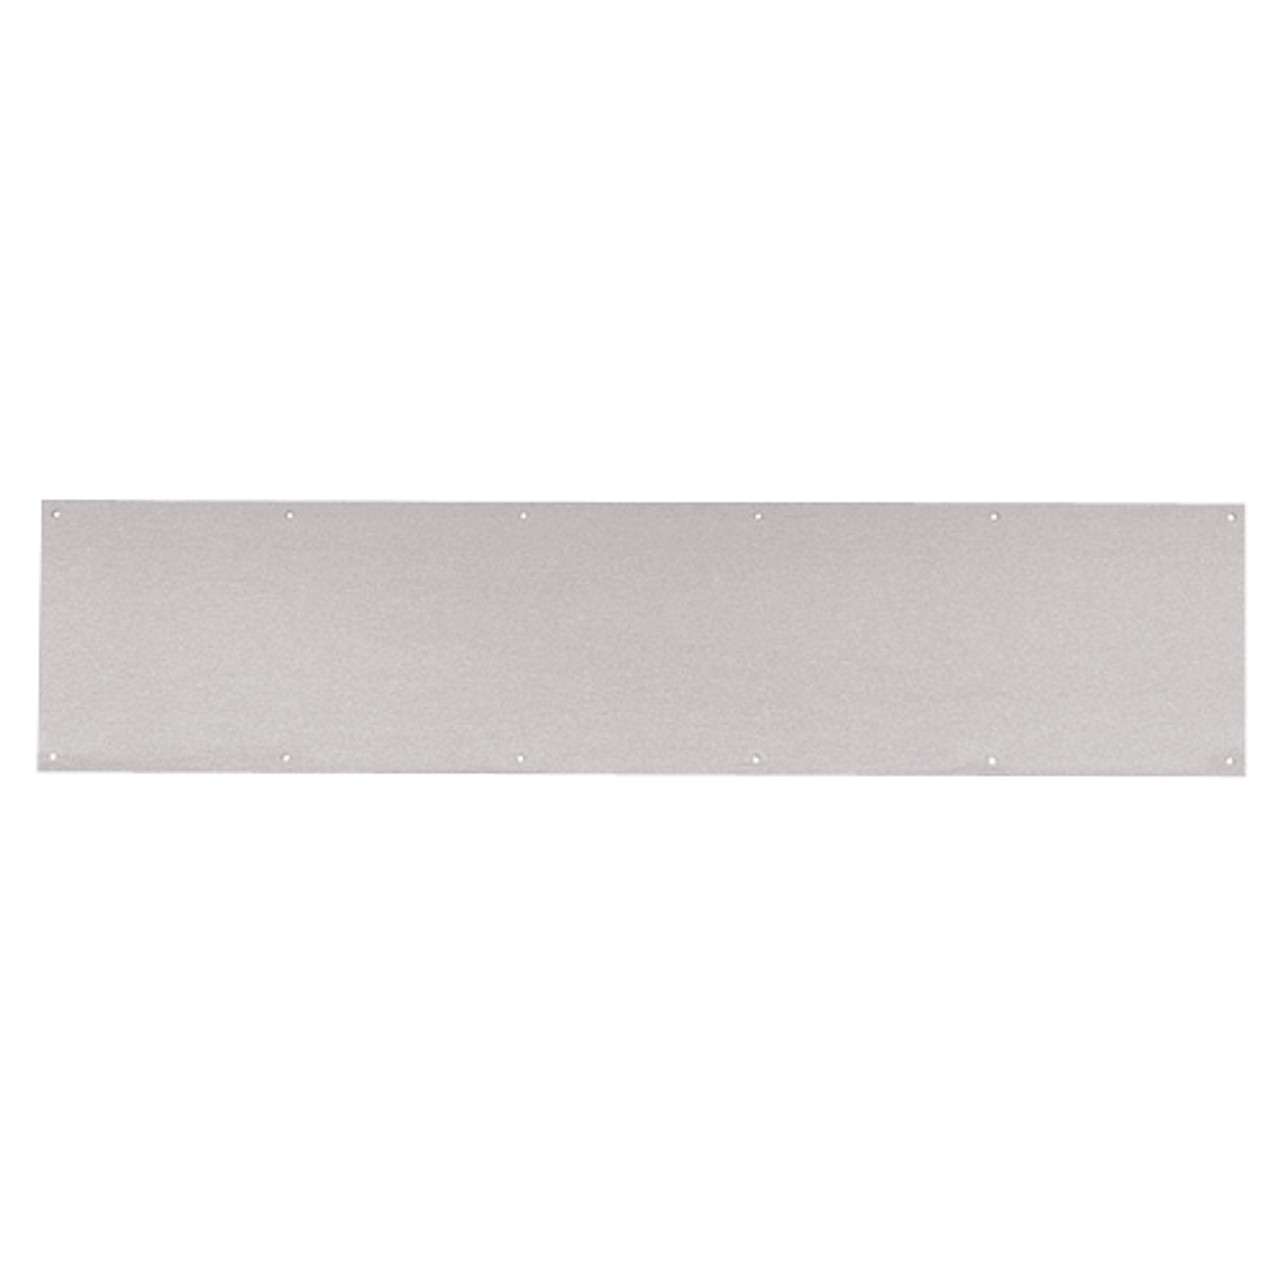 8400-US32D-12x33-B-CS Ives 8400 Series Protection Plate in Satin Stainless Steel